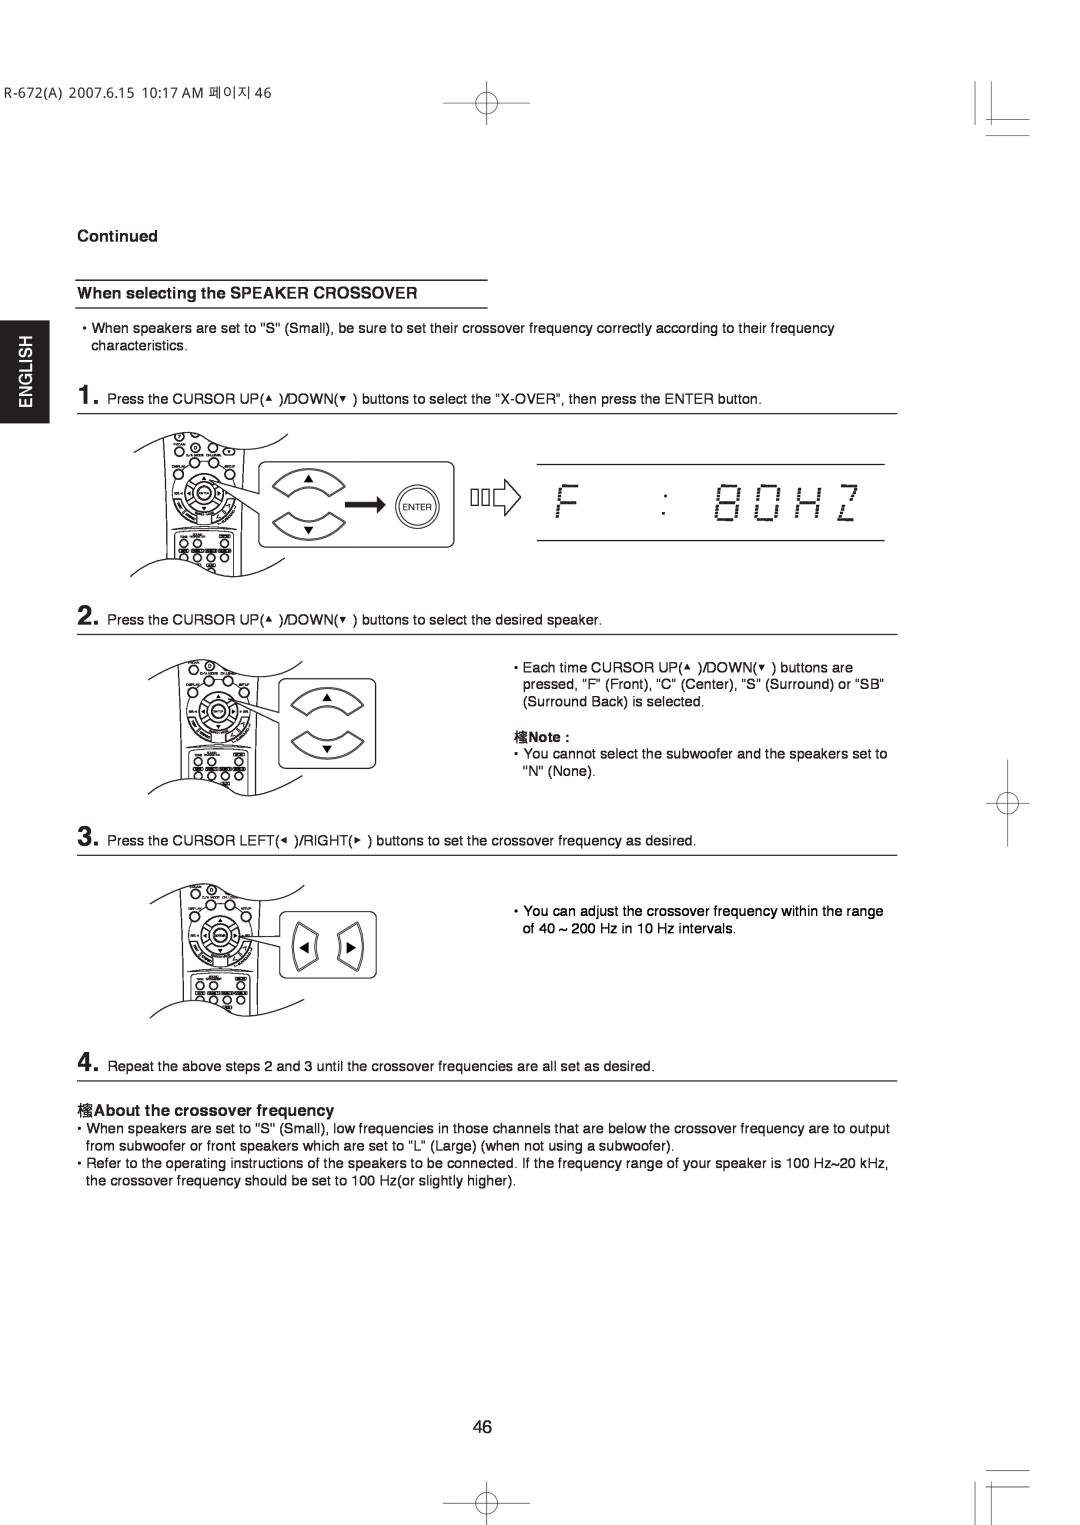 XM Satellite Radio R-672 manual Continued When selecting the SPEAKER CROSSOVER, About the crossover frequency, English 